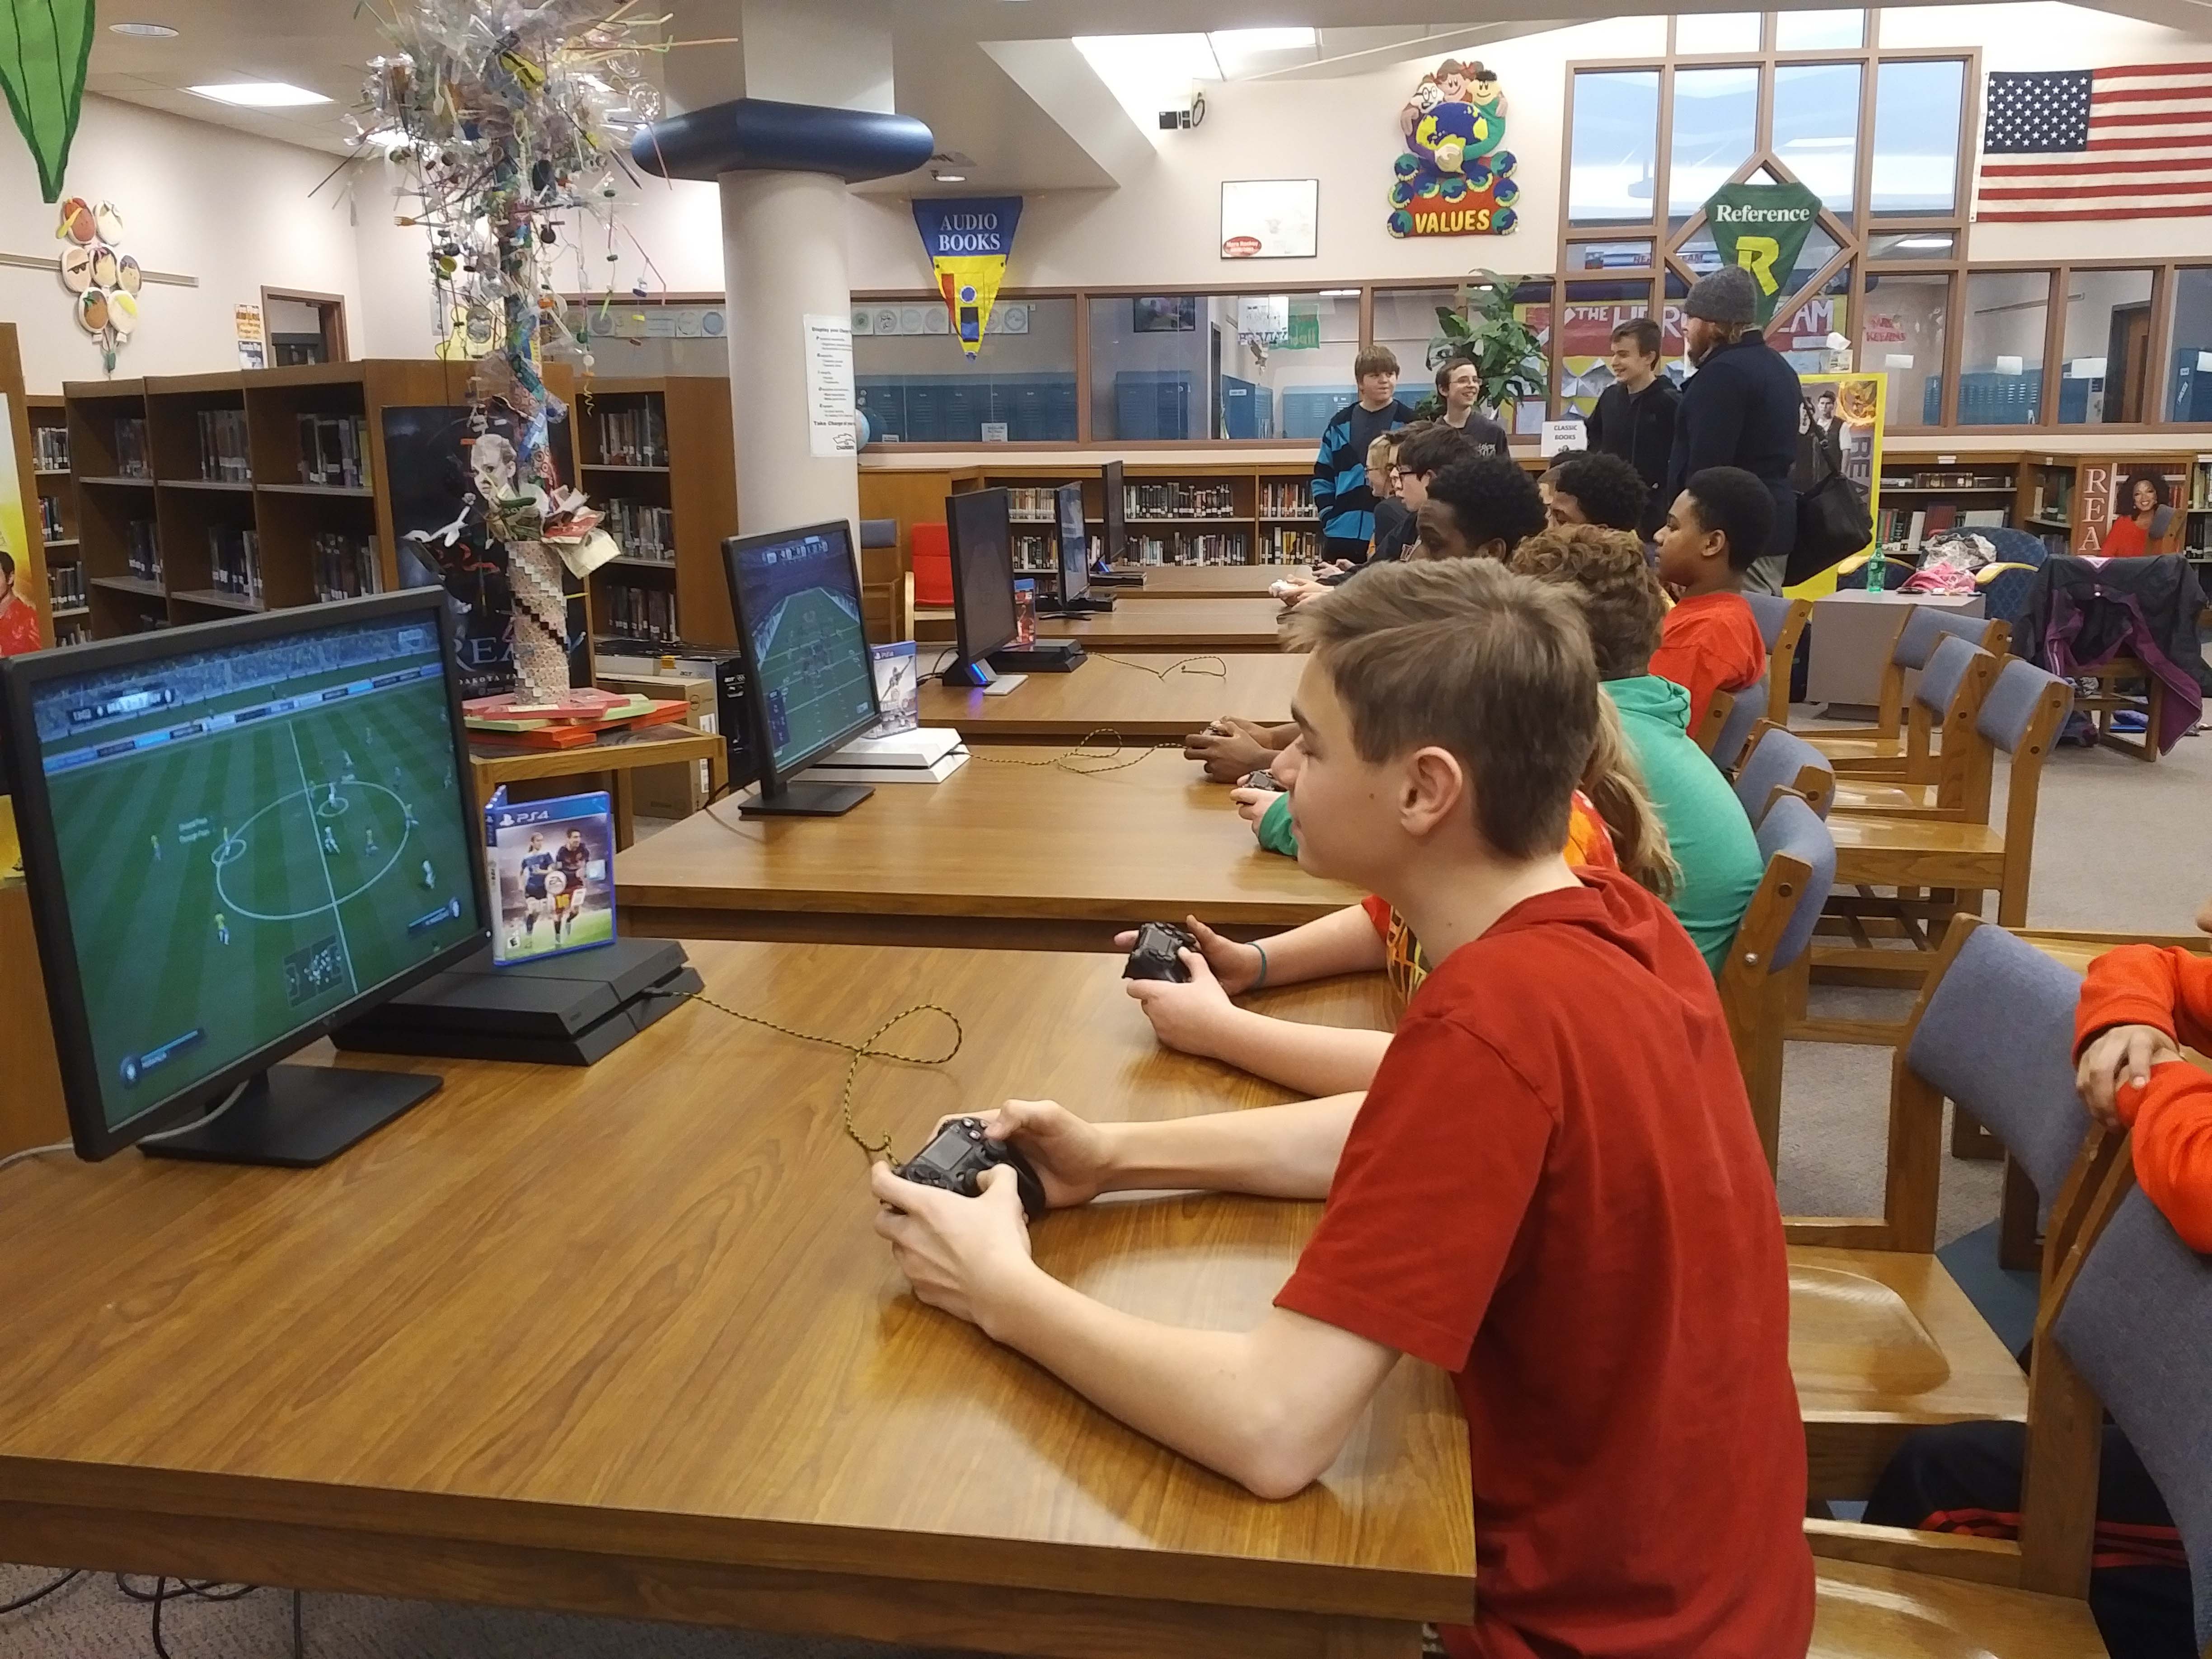 Kids competing in the soccer video game FIFA